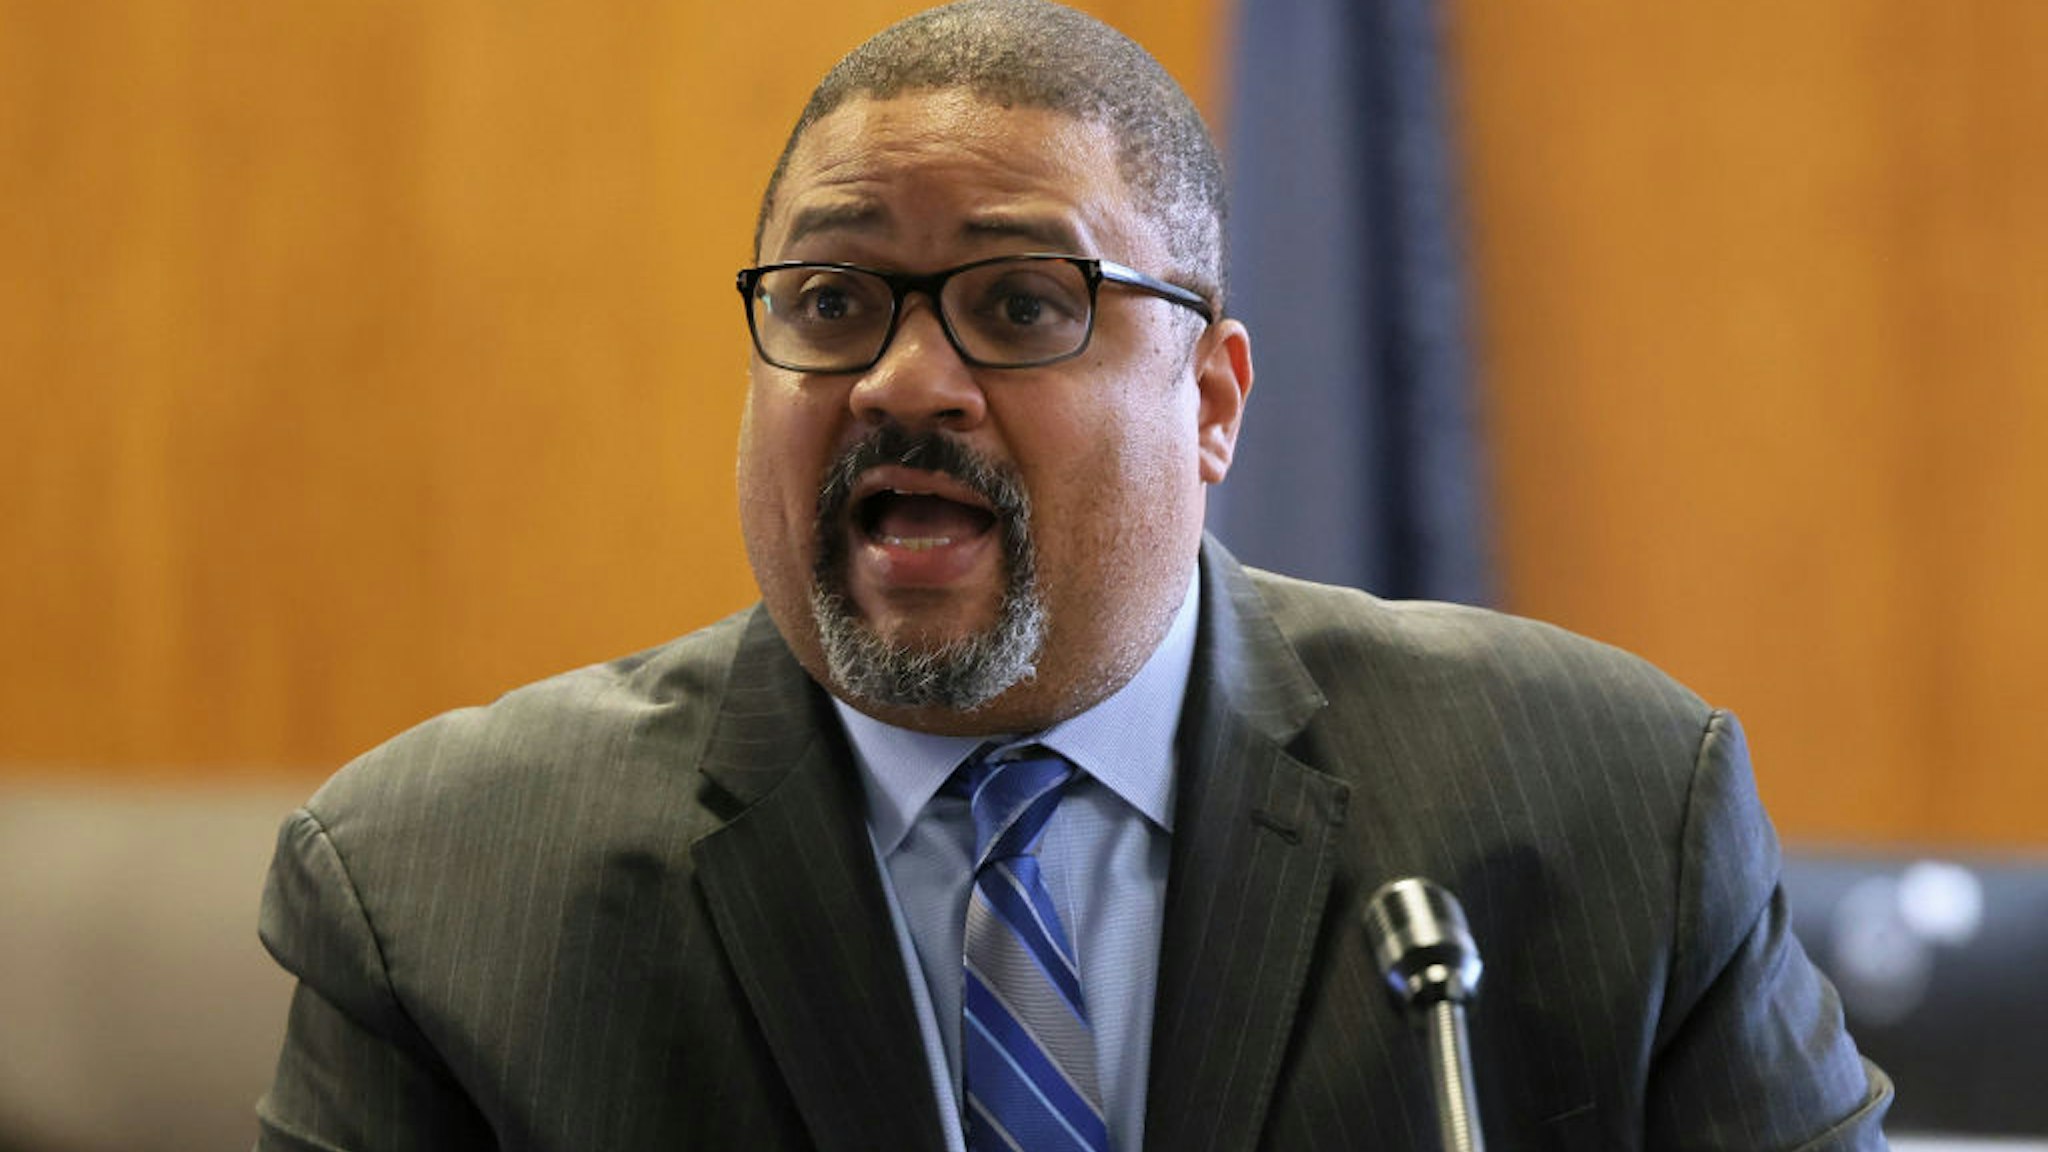 Manhattan District Attorney Alvin L. Bragg, Jr. speaks during a press conference regarding Steven Lopez and the Central Park jogger case at New York State Supreme Court on July 25, 2022 in New York City.